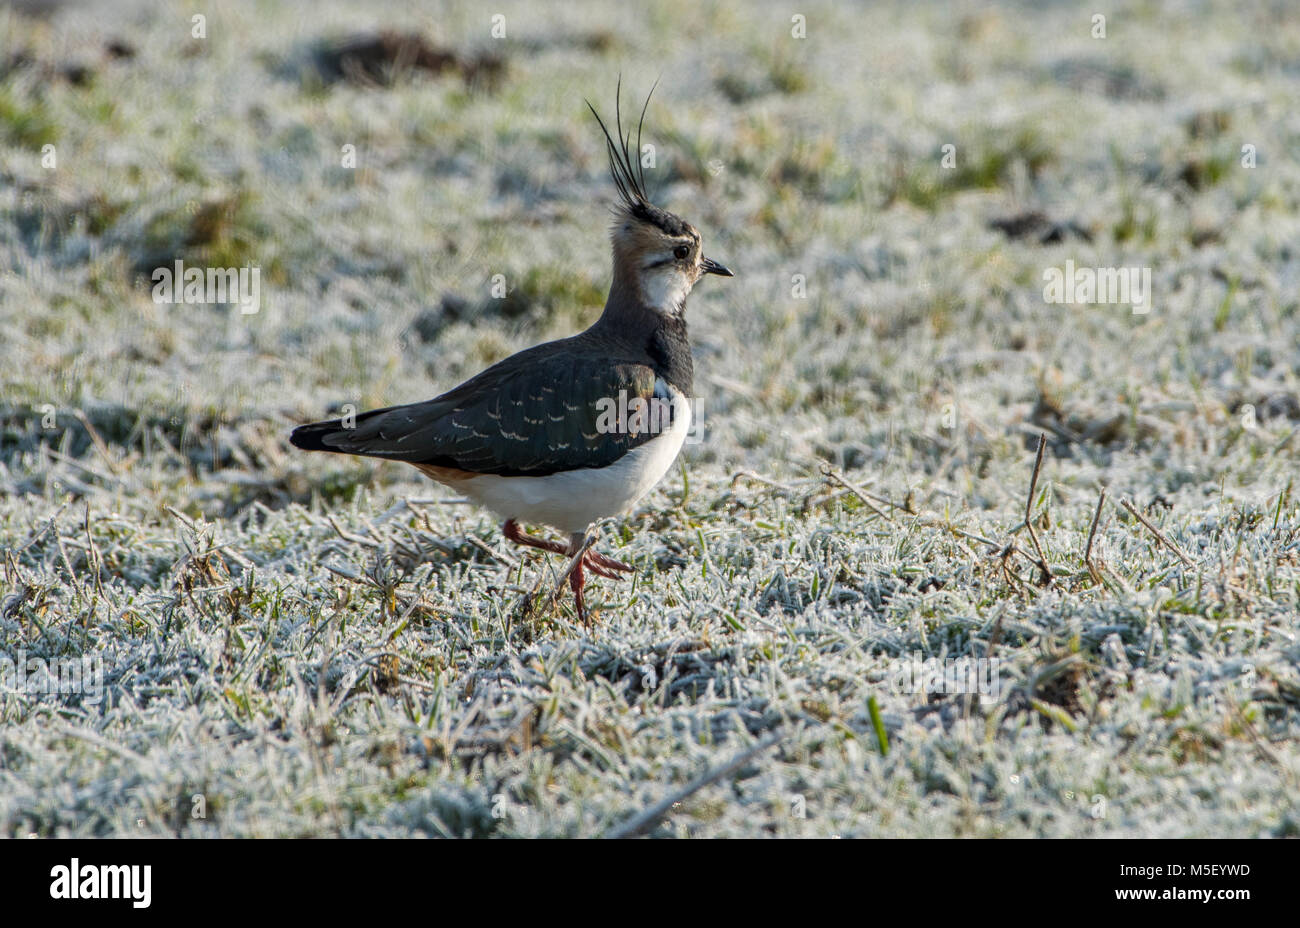 Whitewell, UK. 23rd February, 2018. A lapwing looking for worms and insects in the frosty pasture at Whitewell, Clitheroe, Lancashaire. This farmland bird has suffered significant declines recently and is now a Red List of species. Credit: John Eveson/Alamy Live News Stock Photo